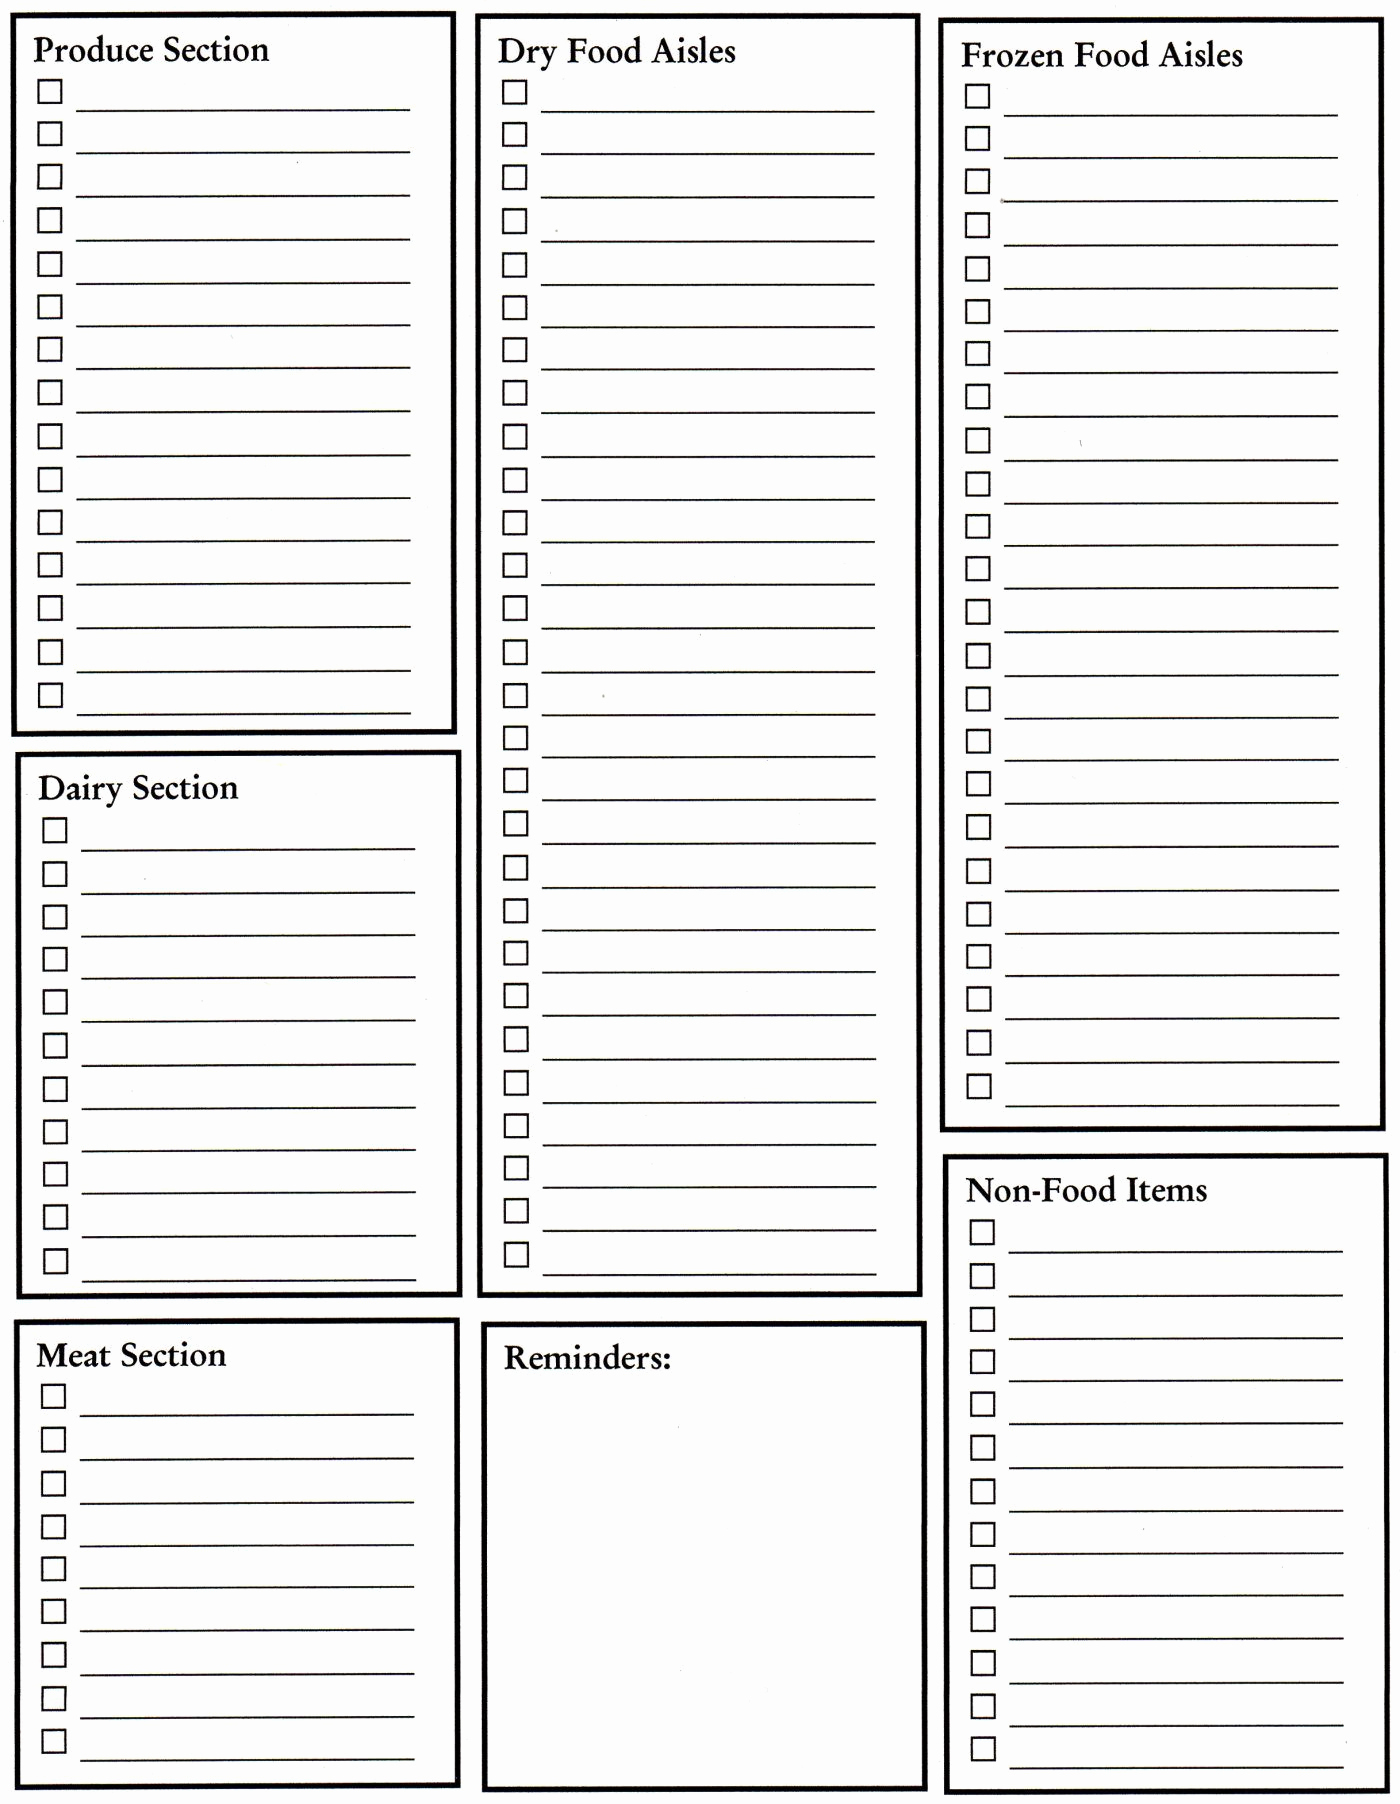 Printable Grocery List Template Luxury Grocery List Blank Template Great Idea Need to Keep On